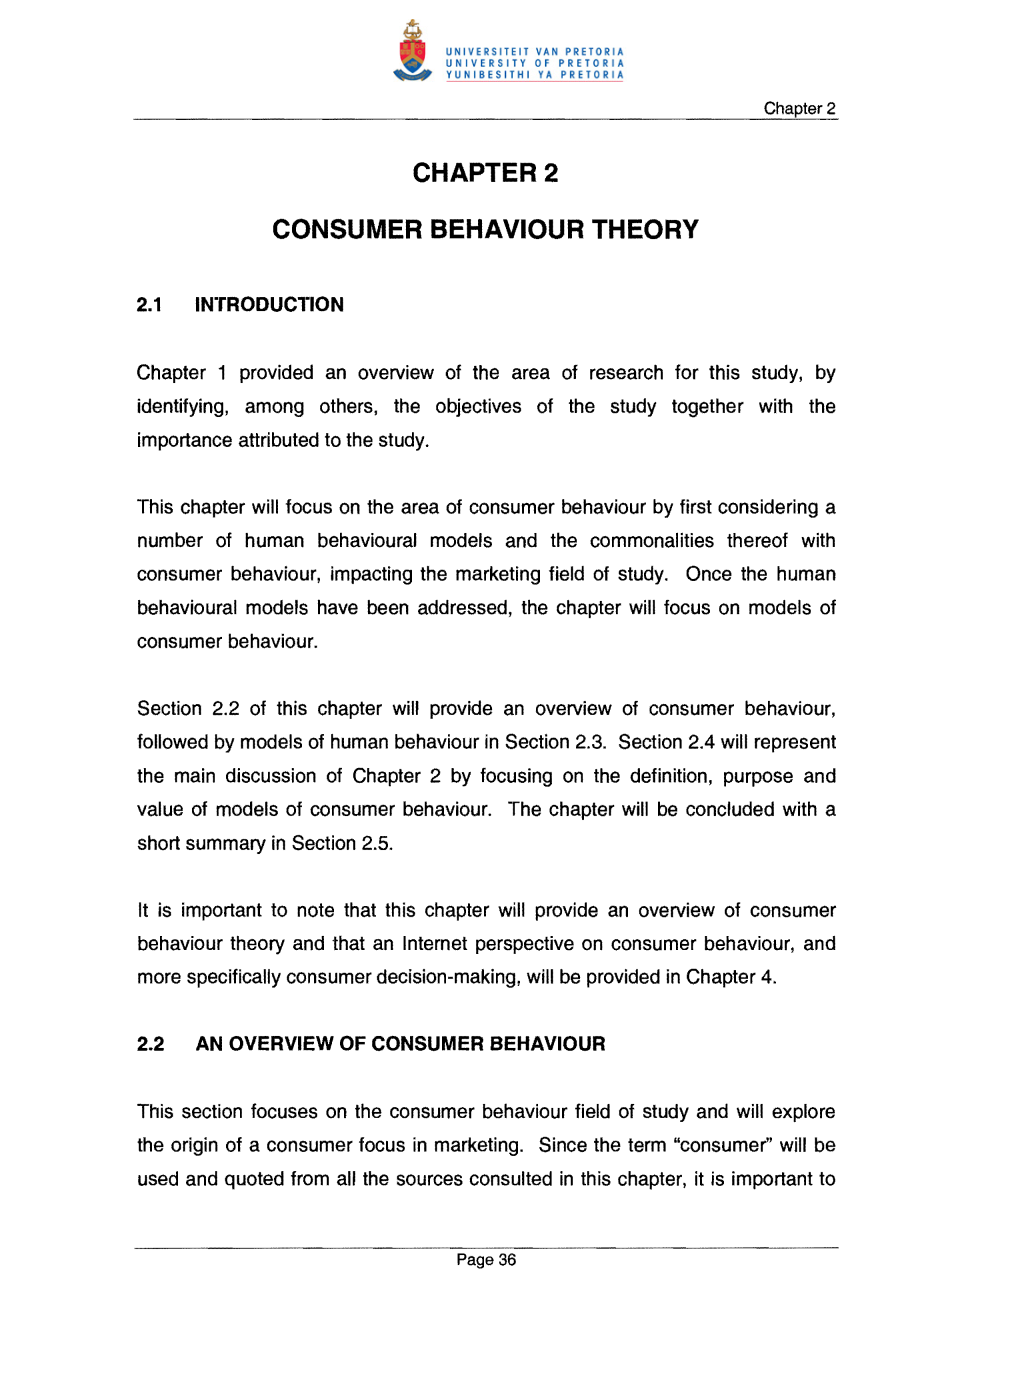 Chapter 2 Consumer Behaviour Theory